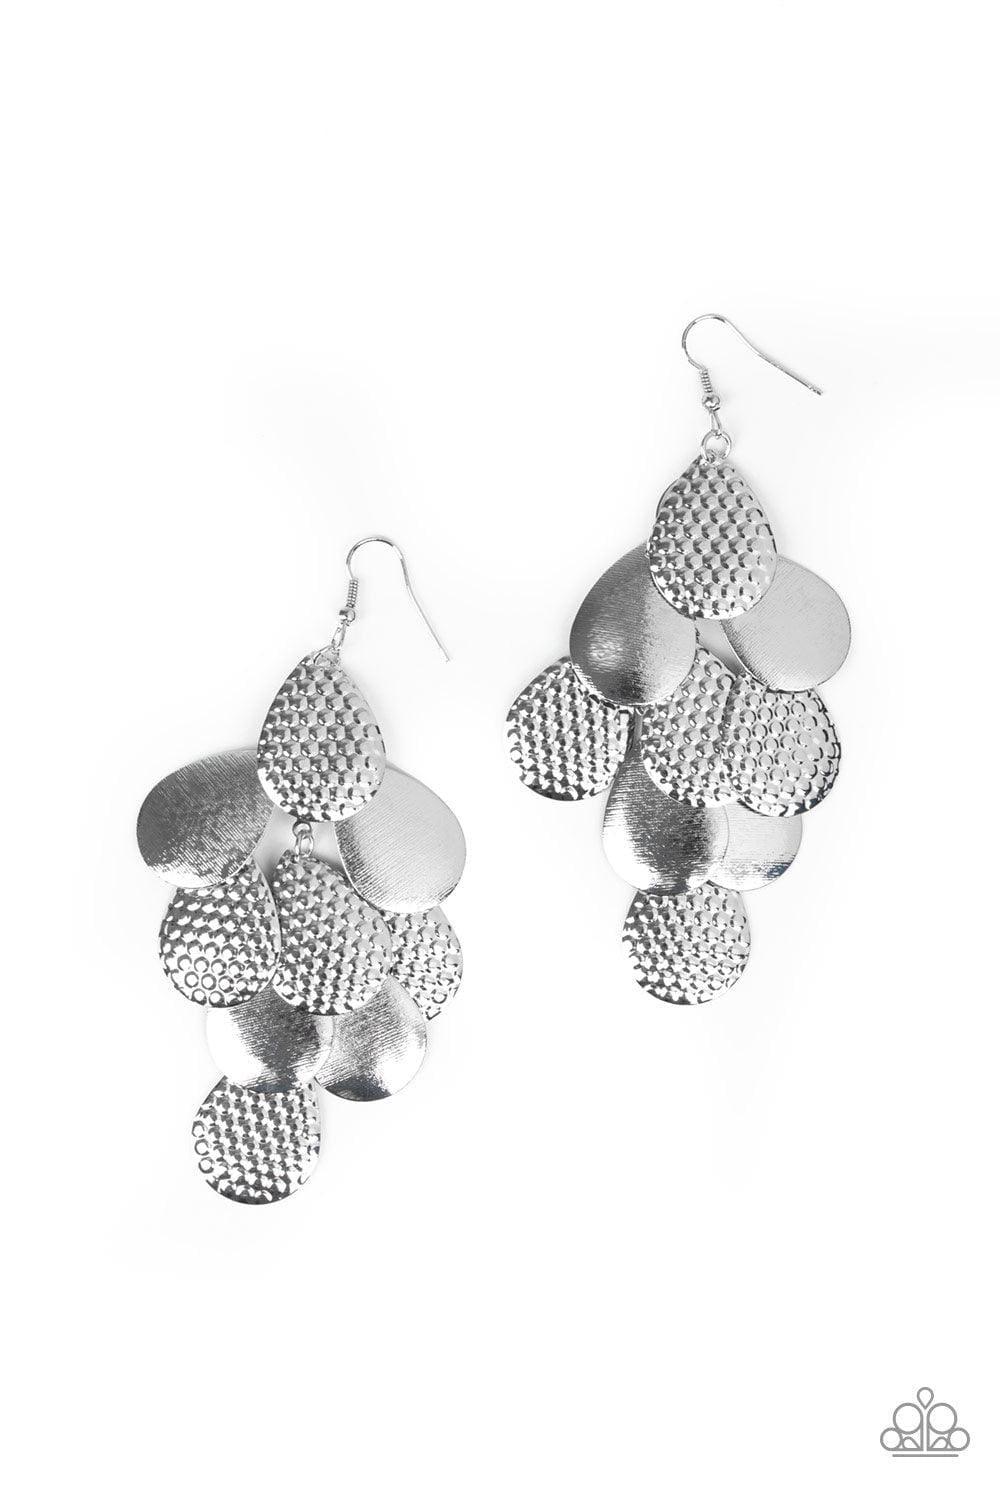 Paparazzi Accessories - Chime Time - Silver Earrings - Bling by JessieK